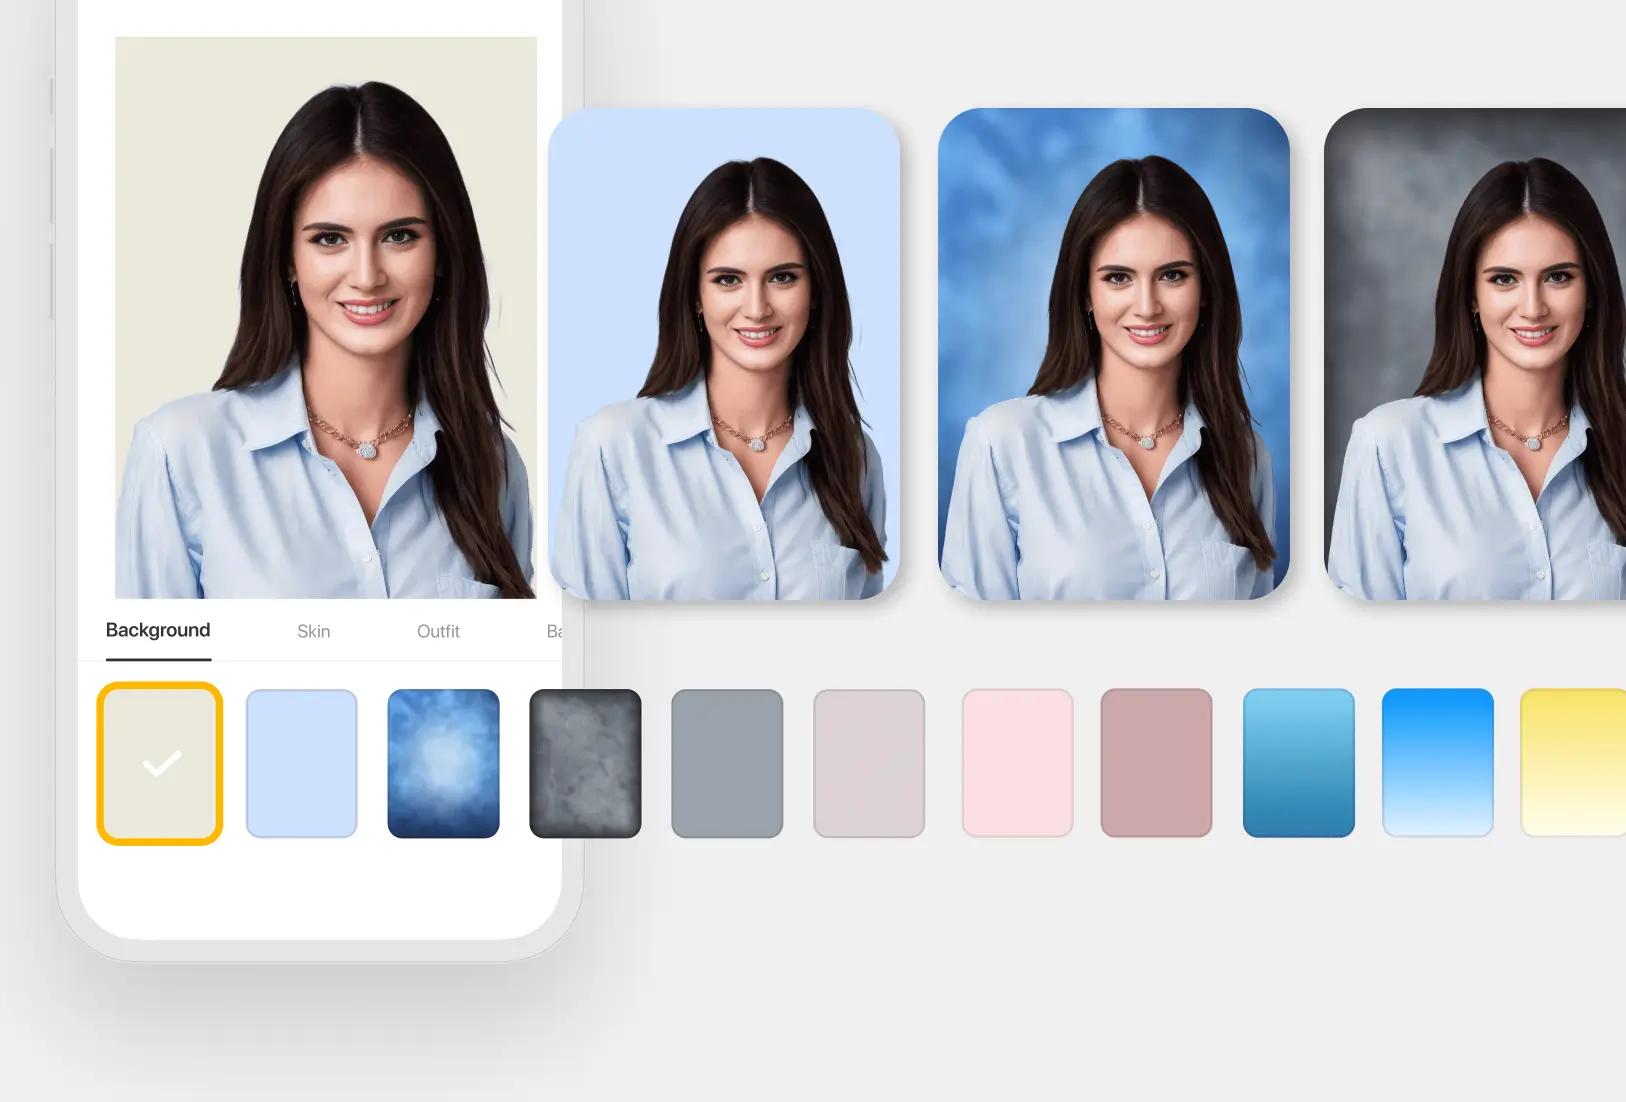 Choose from a range of background colors, including stylish yearbook backgrounds.